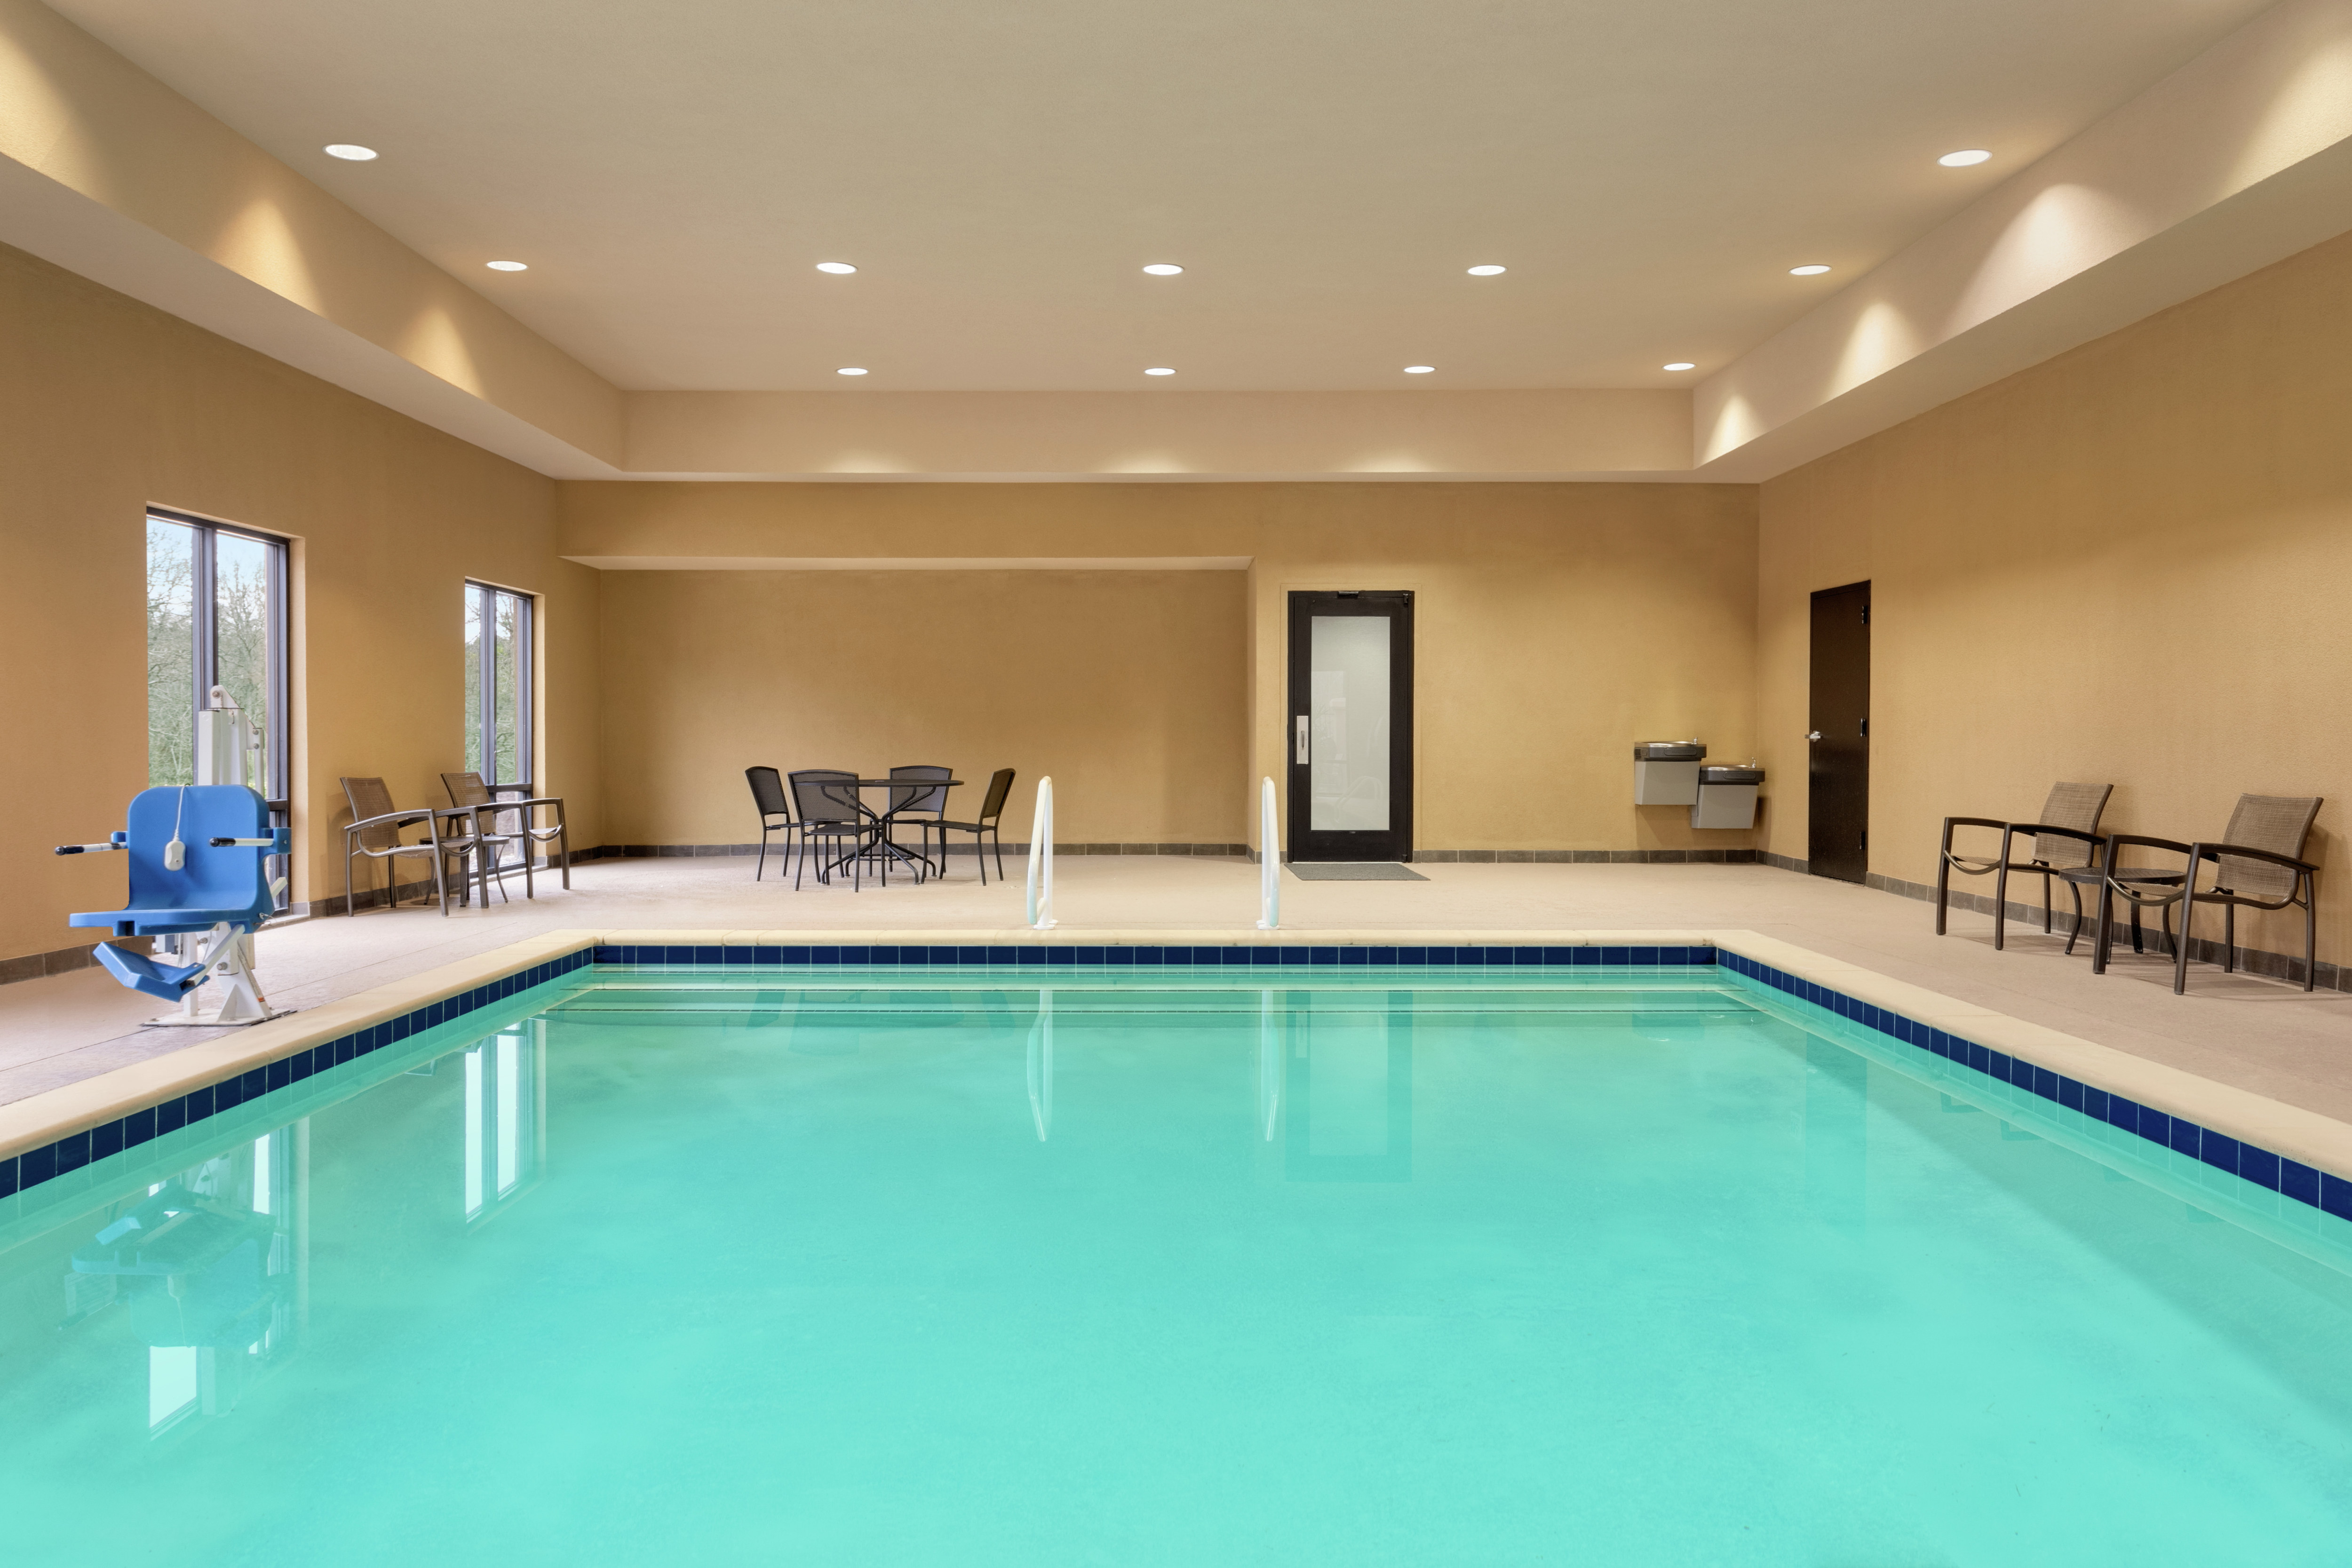 Spacious indoor pool featuring large windows with ample light, seating, and accessible chair-lift.